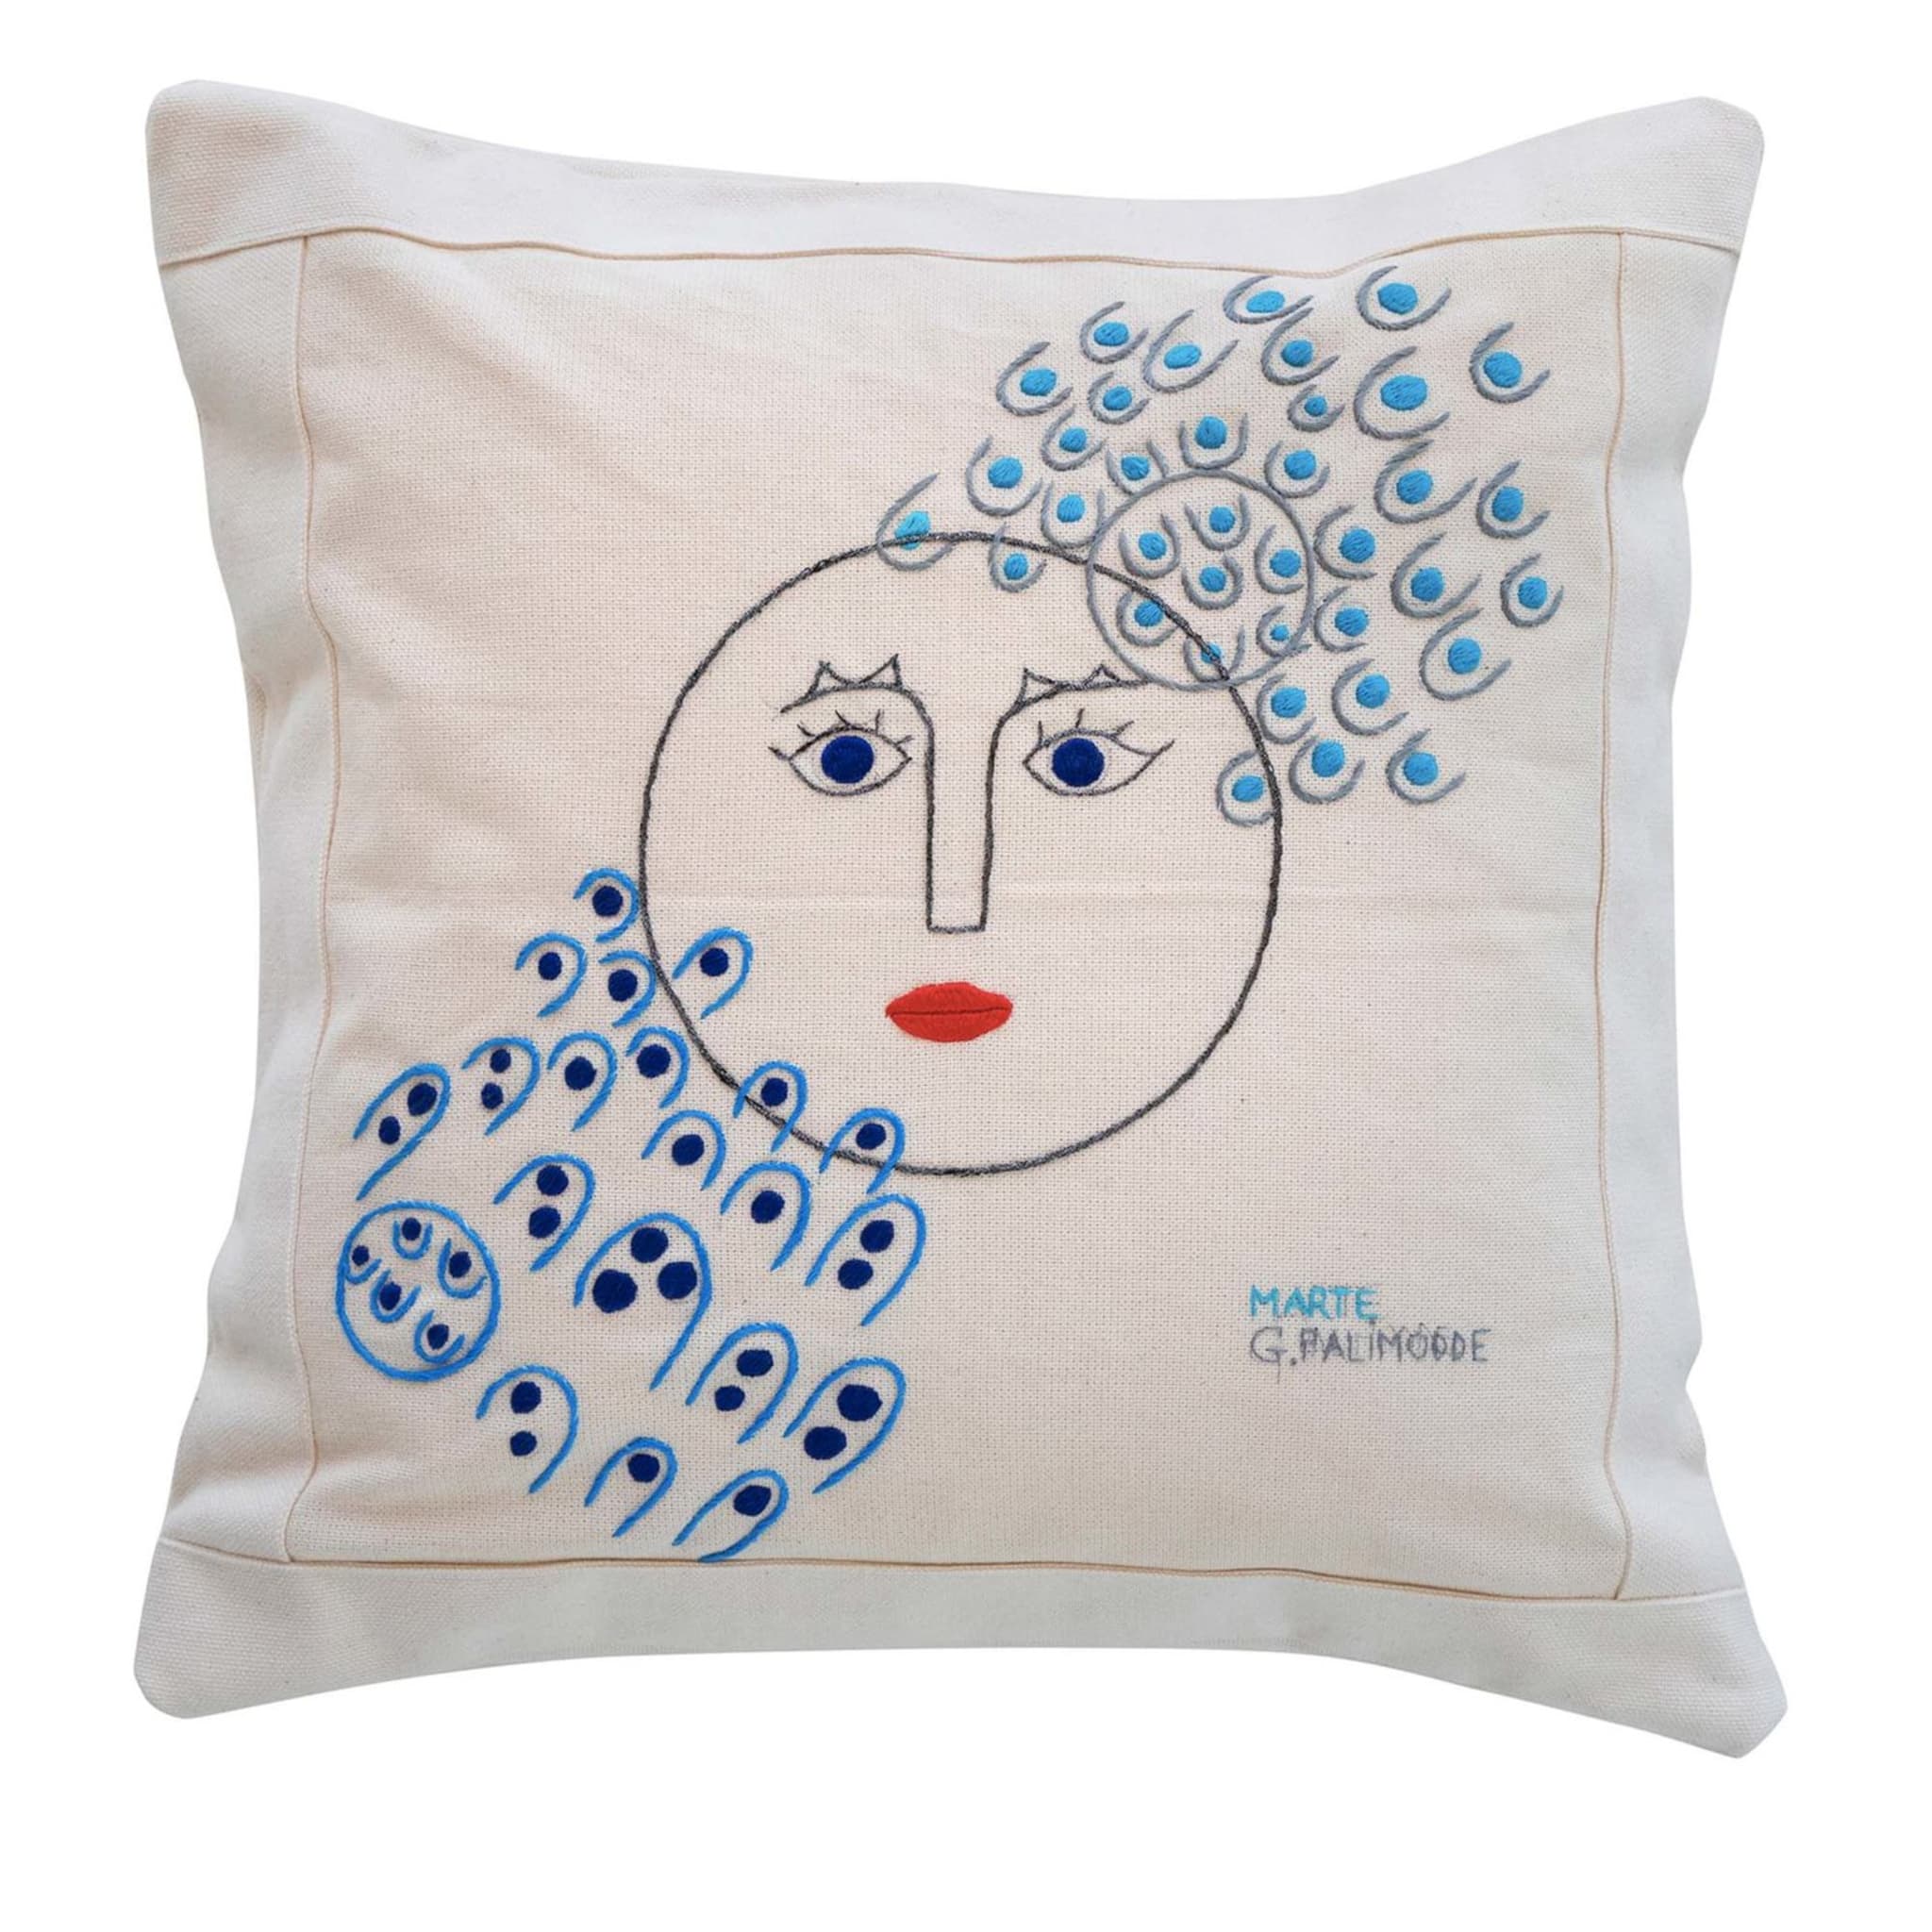 Embroidered Woman Cushion #1 - Main view